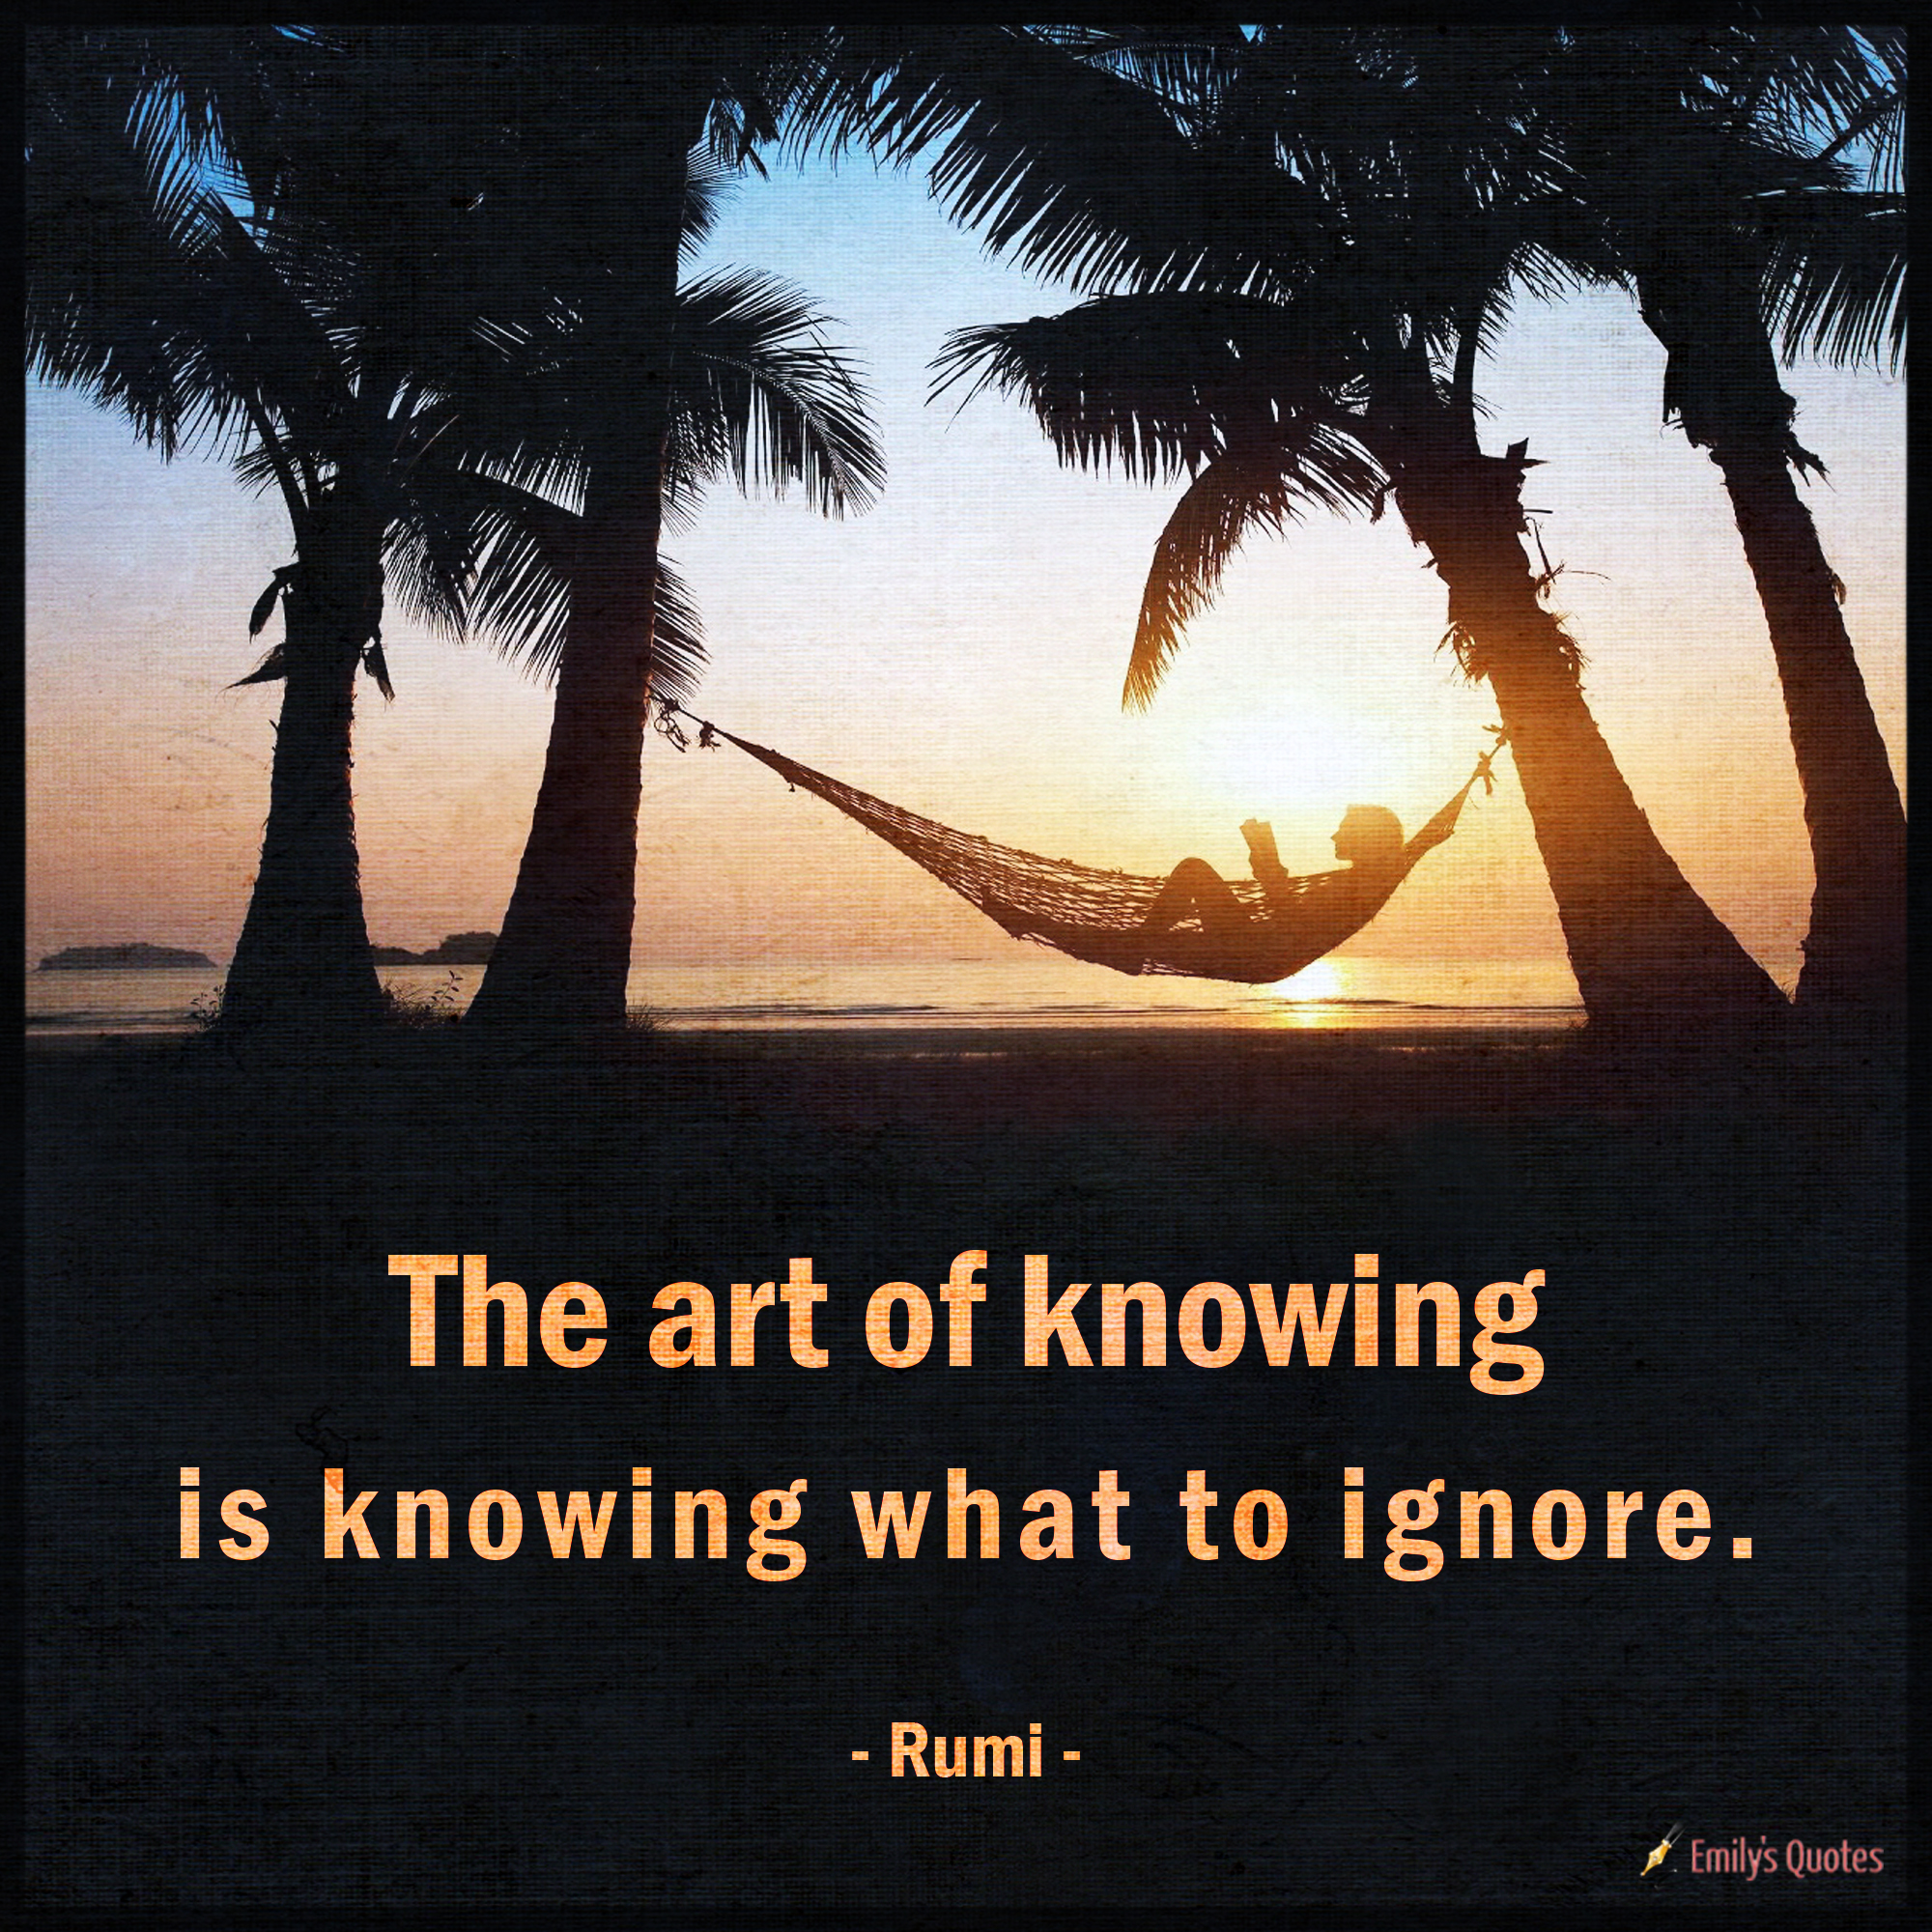 The art of knowing is knowing what to ignore